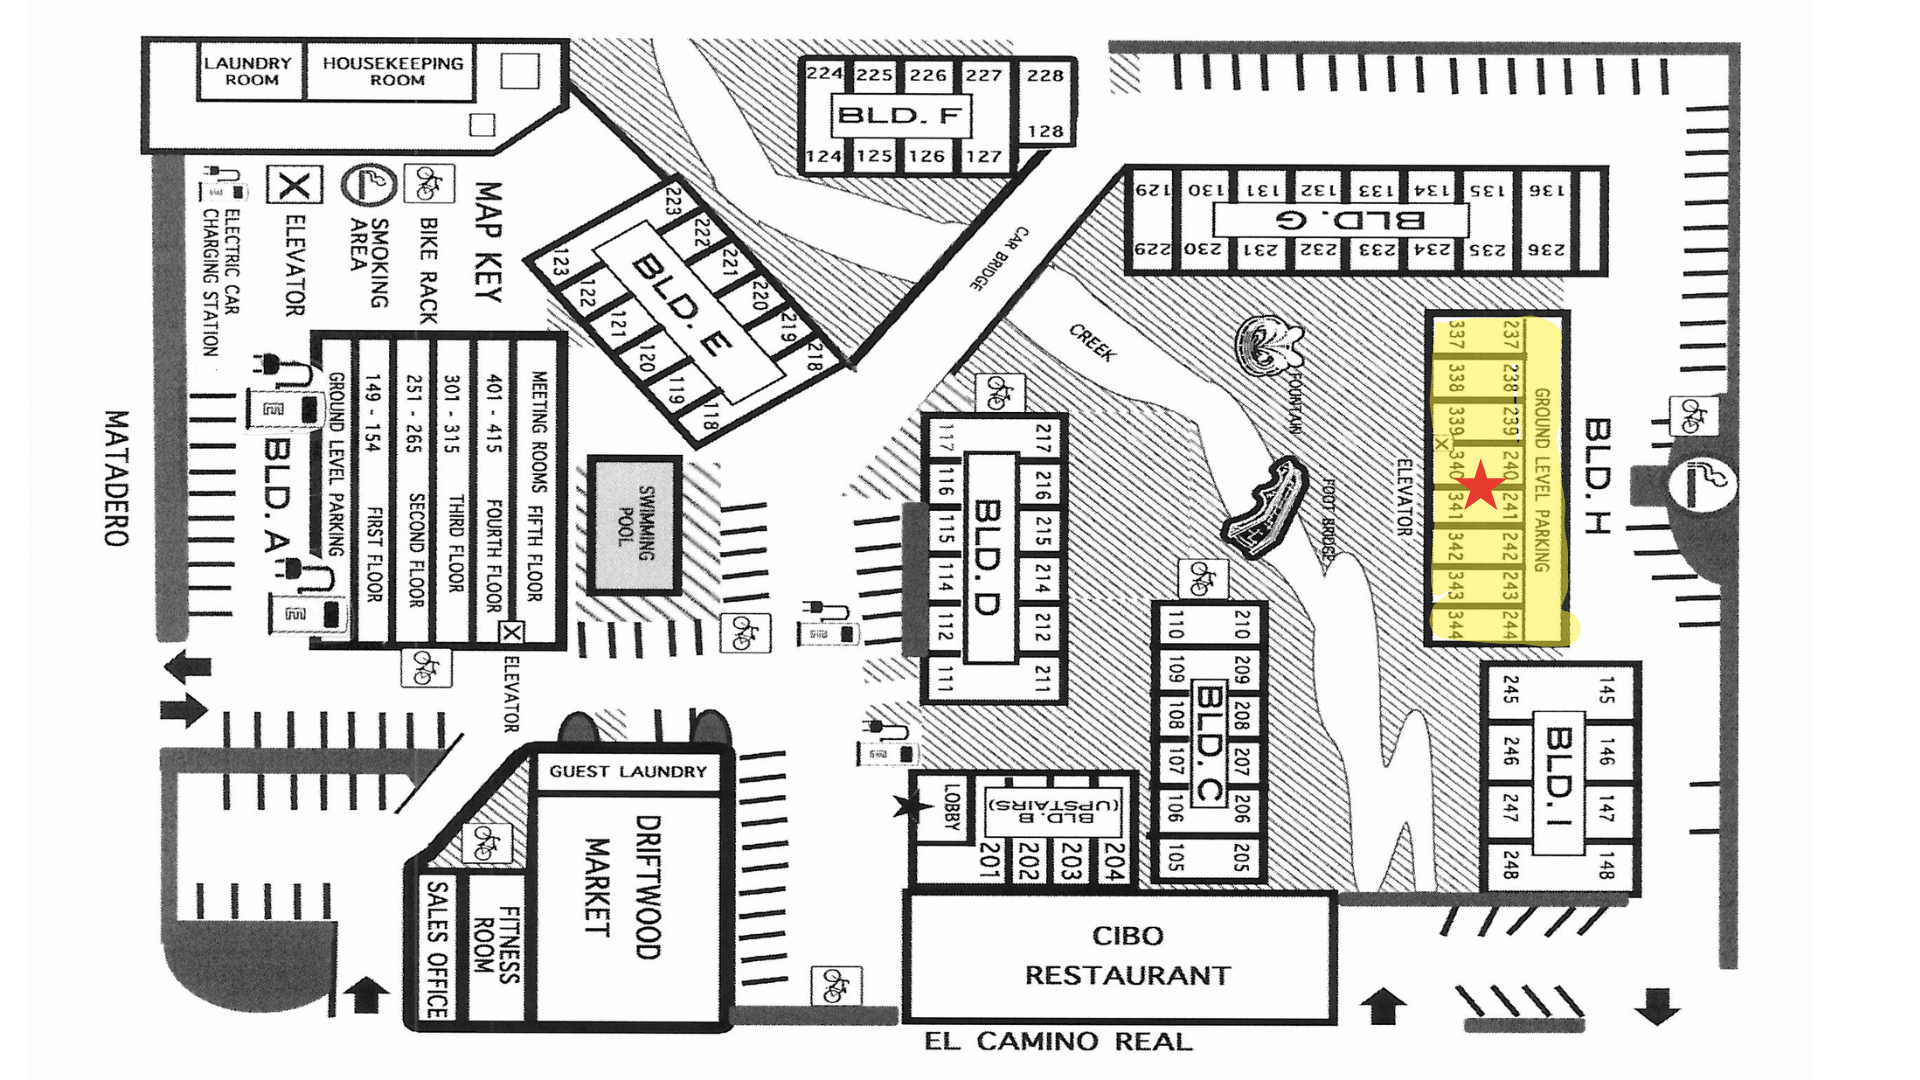 Hotel Map with Building H Highlighted